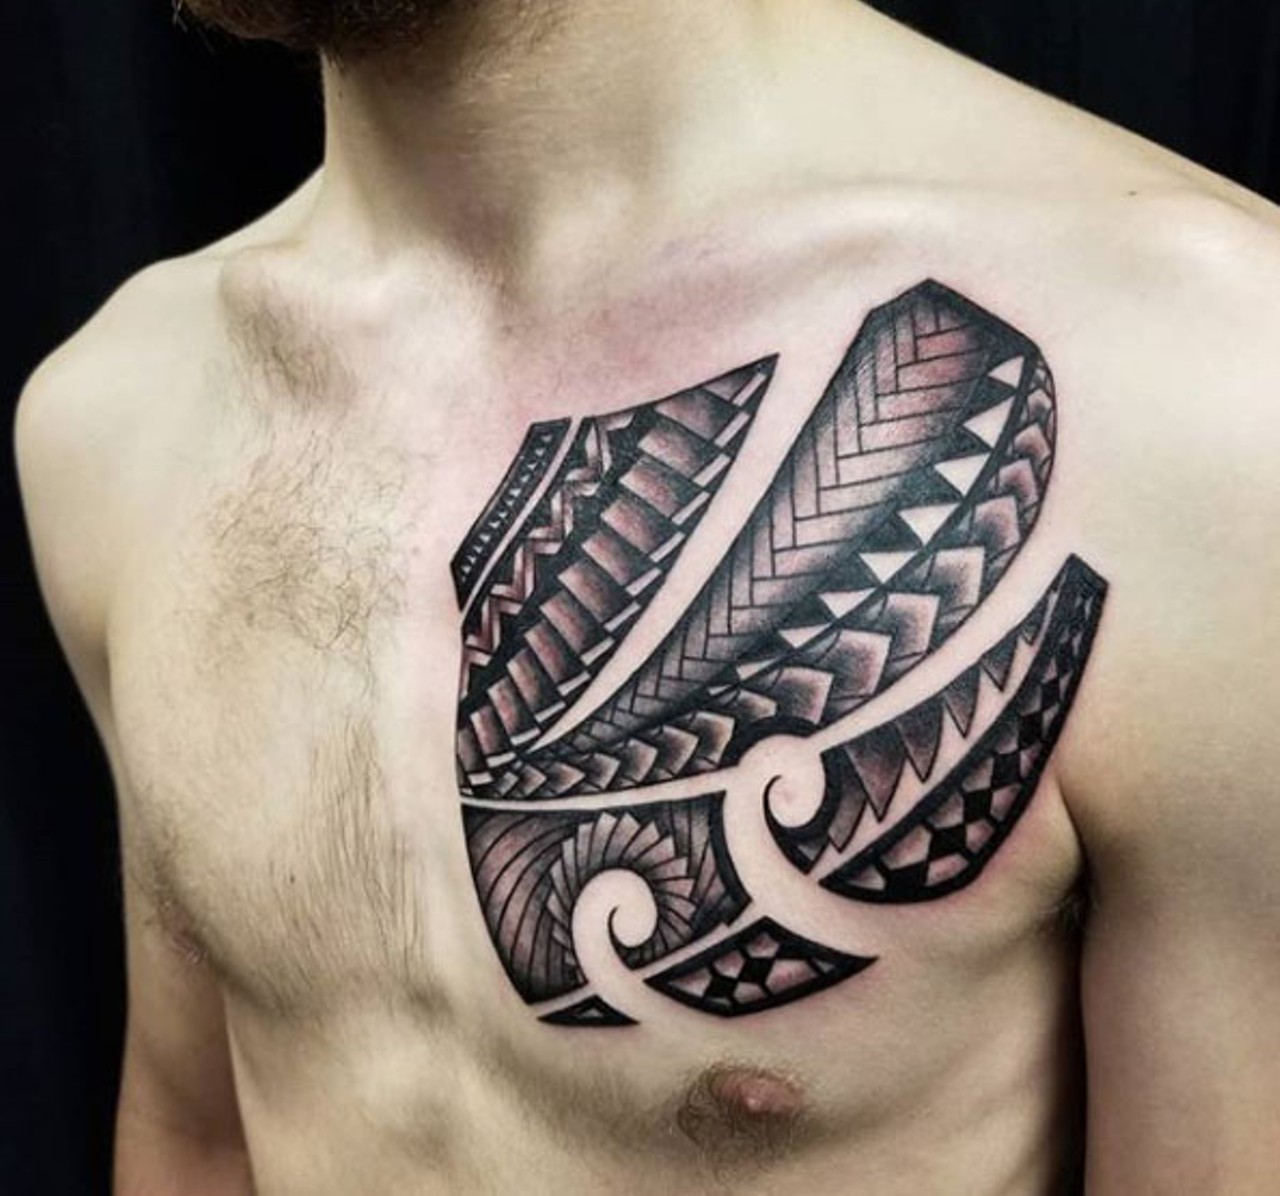 The Inkwell Tattoo Company
1941 Mentor Ave., Painsville, 440-357-2837
Three passionate artists at the Inkwell Tattoo Company offer a diverse range of tattoos. Pictured tattoo by Joel Ozinga, @desert_wizard
Photo via inkwell_tattoo_co/Instagram